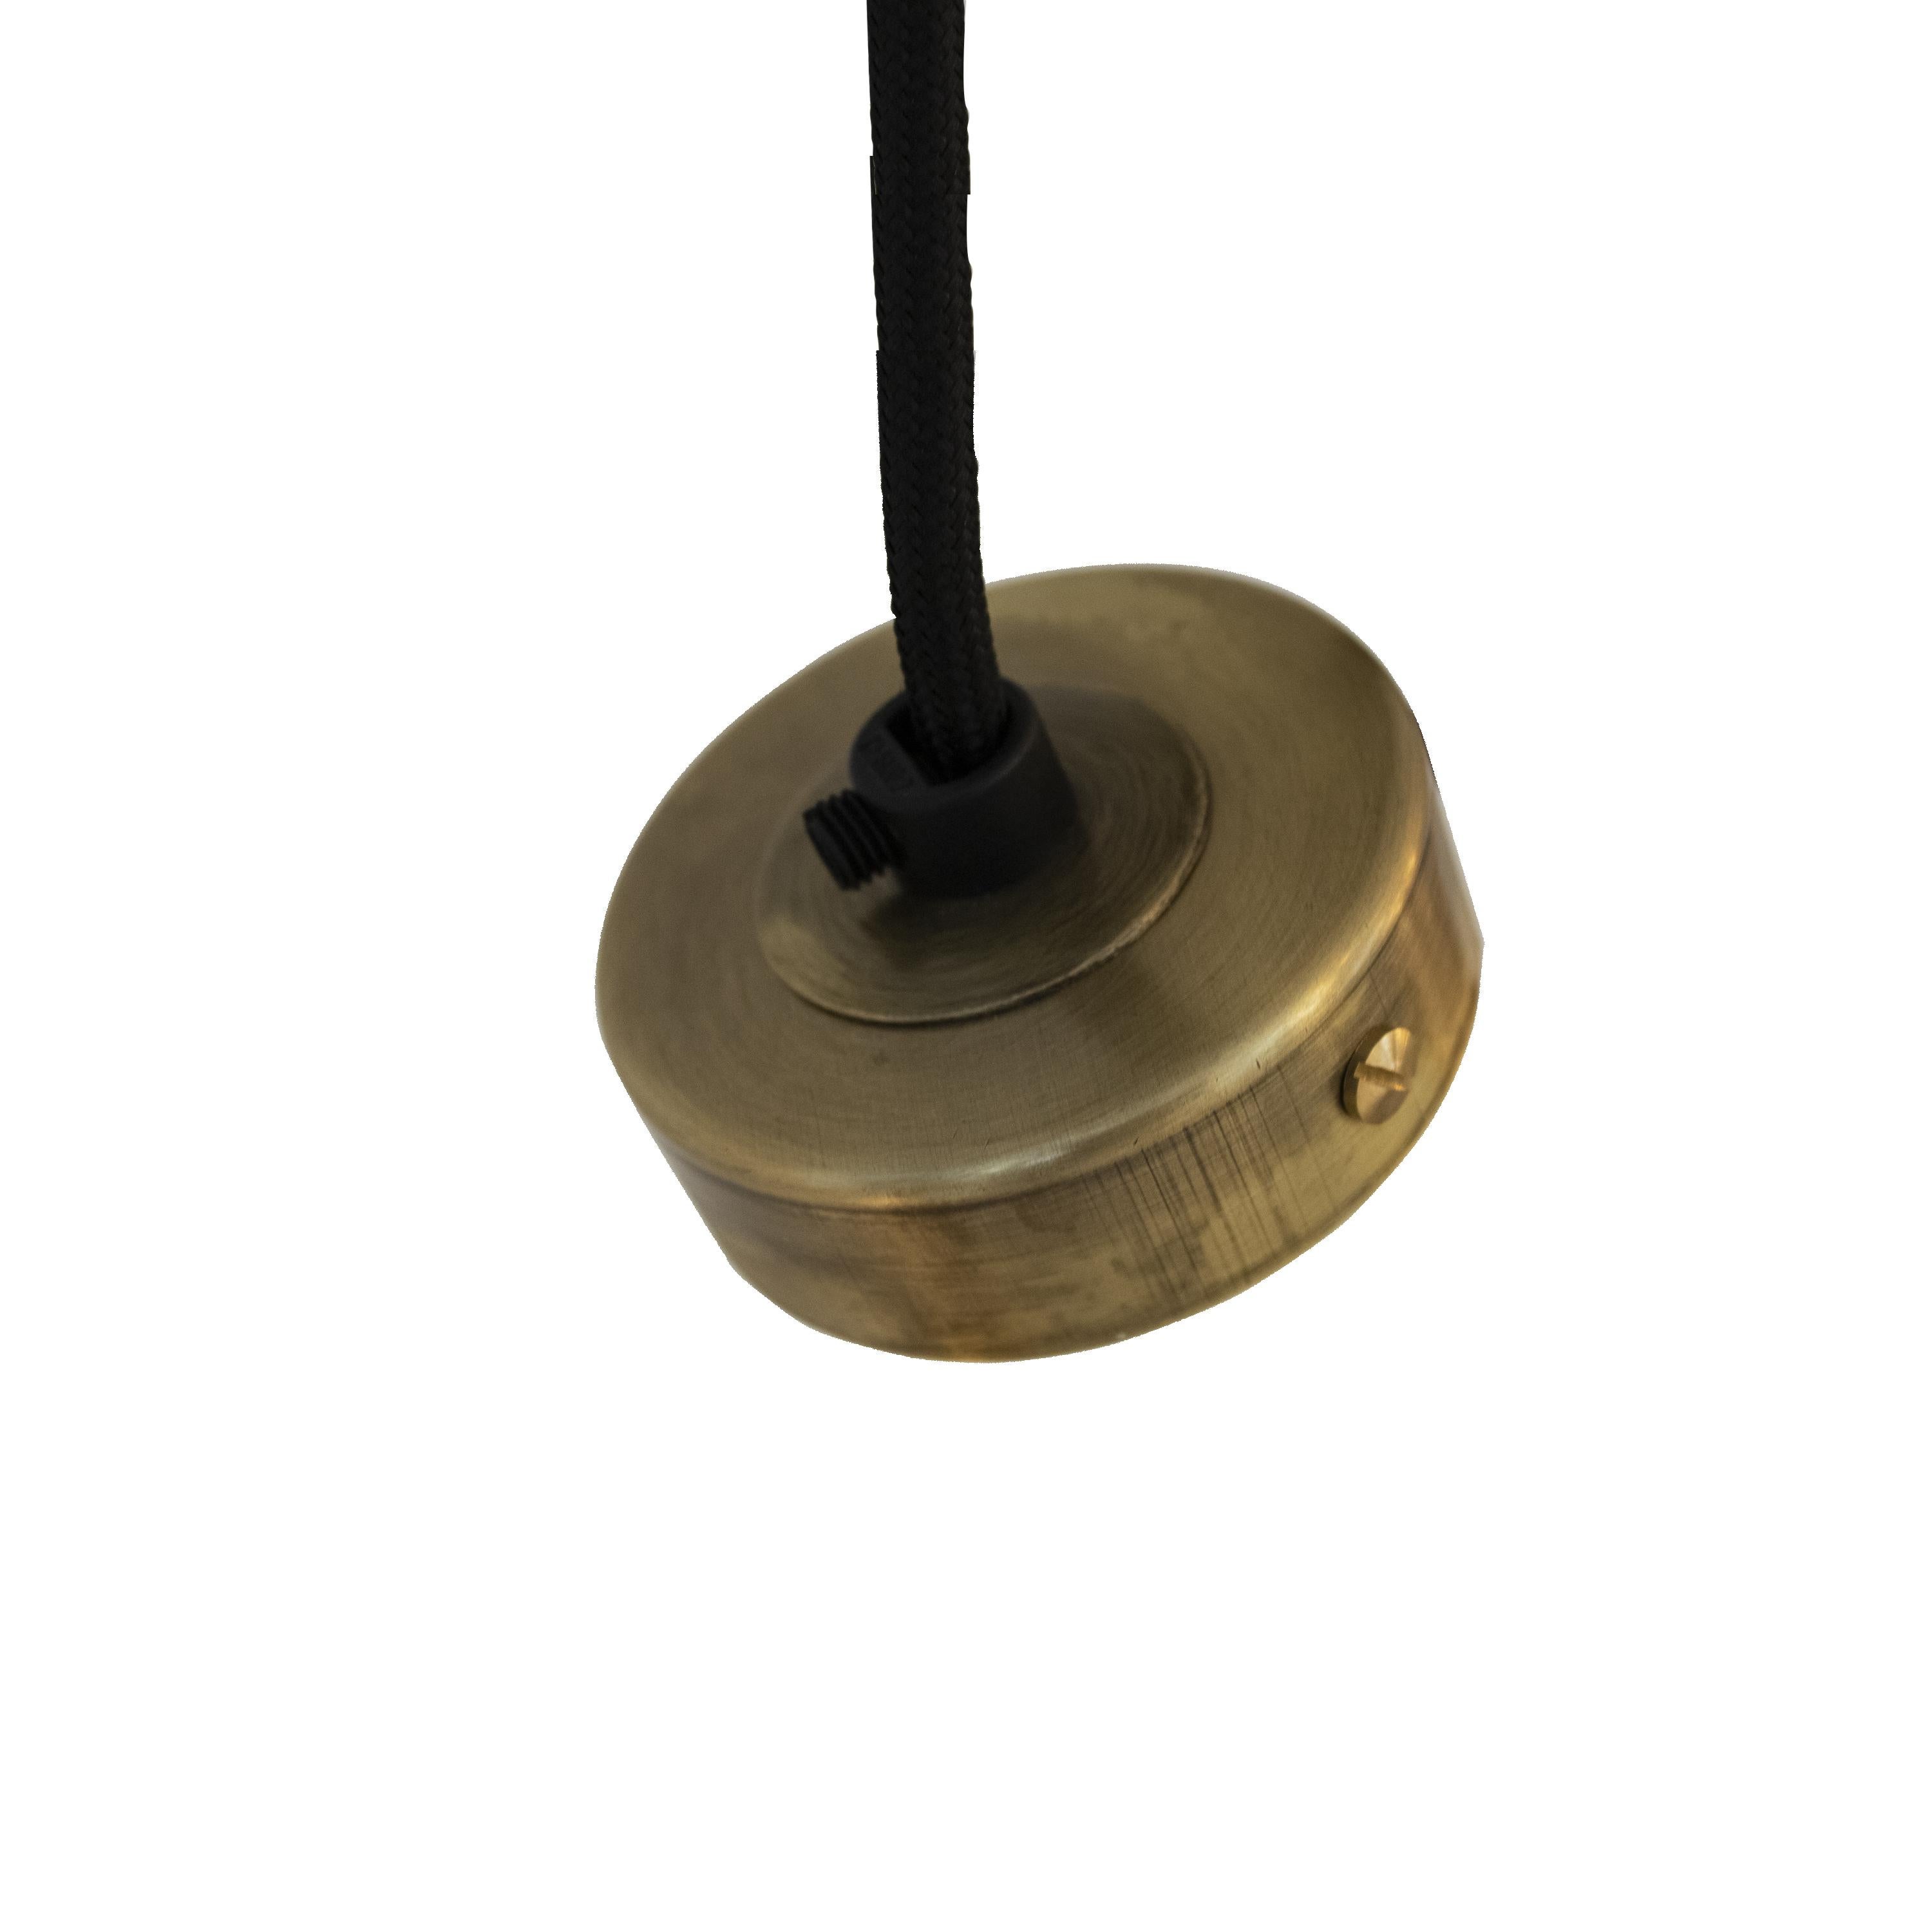 Contemporary Ovel Brass Pandent Light, Designed by IKB191, Spain, 2022 For Sale 1